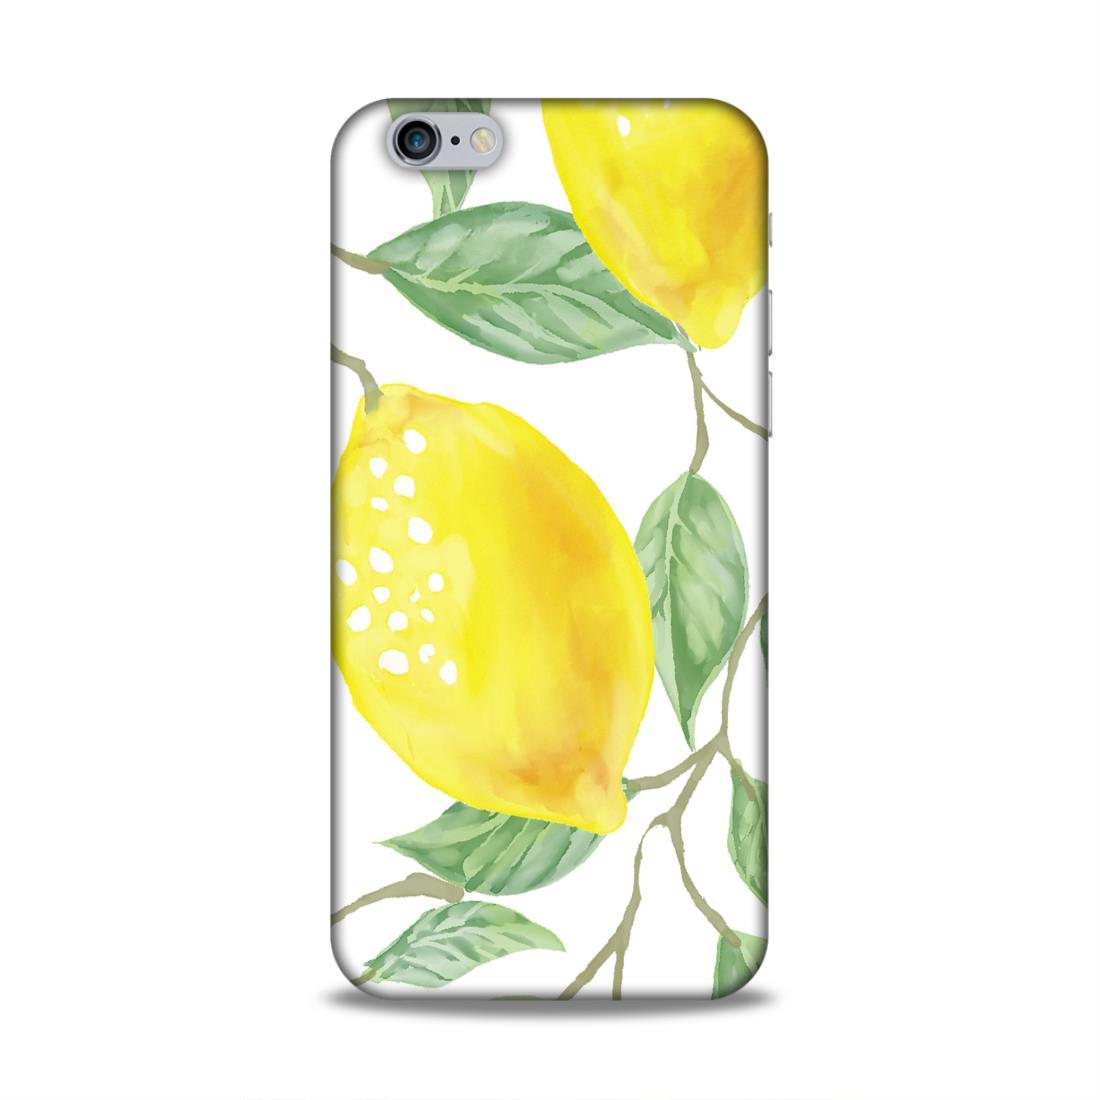 Mango Waterpainting iPhone 6 Mobile Back Case